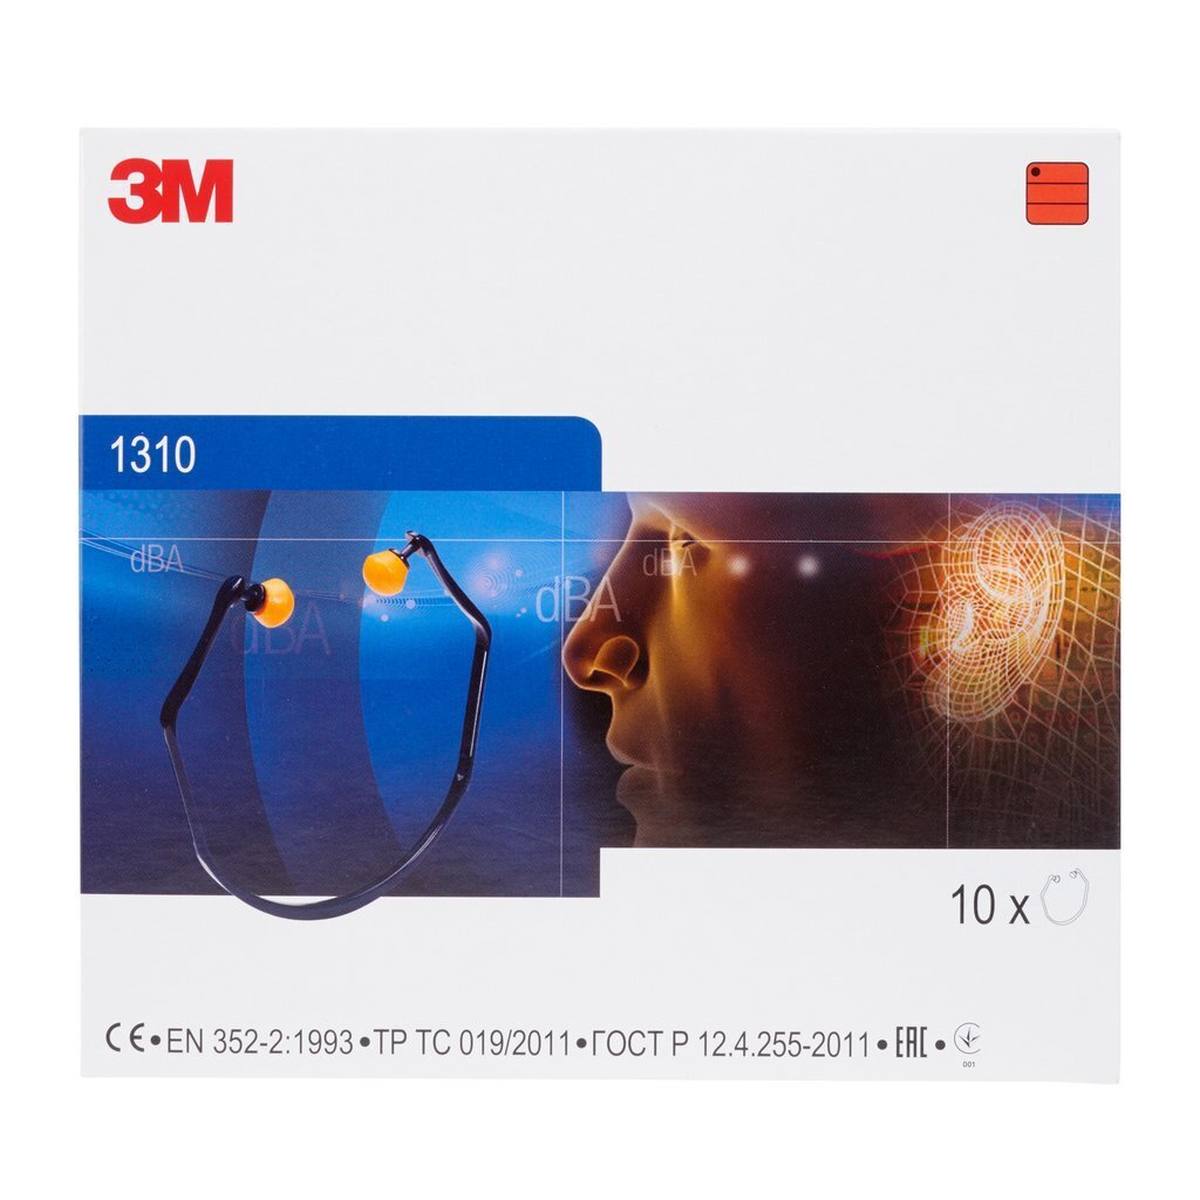 3M 1310 ear muffs, particularly comfortable thanks to the elastic temple design, SNR = 26 dB